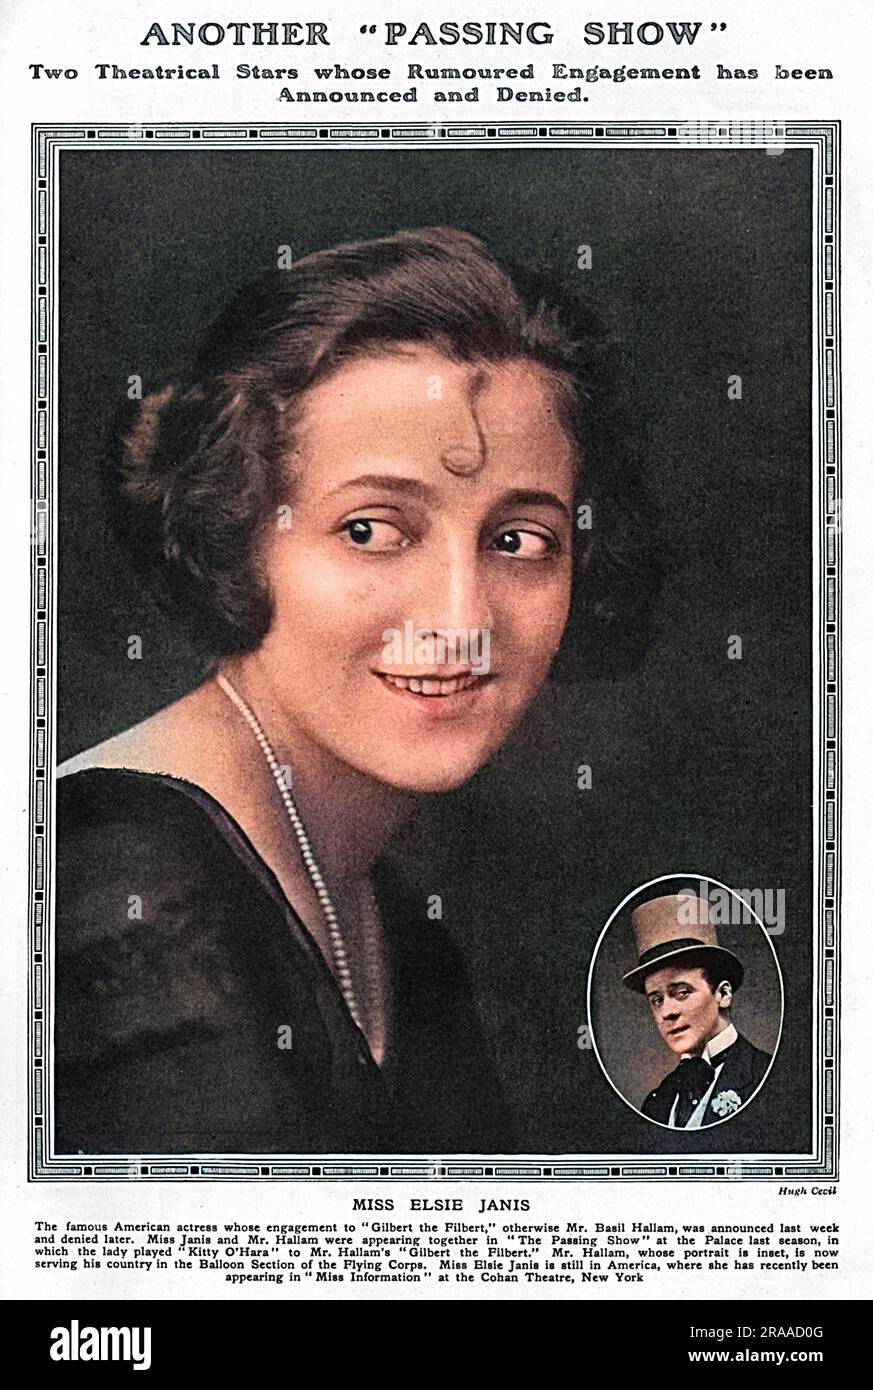 Elsie Janis (March 16, 1889 – February 26, 1956), American singer, songwriter, actress, and screenwriter. Entertaining the troops during World War I immortalized her as 'the sweetheart of the AEF' (American Expeditionary Force). Inset is a picture of Basil Hallam, born Basil Hallam Radford (1889-1916), English actor and singer, best-known for his role of Gilbert the Filbert, Colonel of the Nuts in the 1915 revue, The Passing Show. Basil joined the Royal Flying Corps in the Army Kite Balloon Section. He died in August 1916 as his balloon drifted towards enemy lines and his parachute became enta Stock Photo